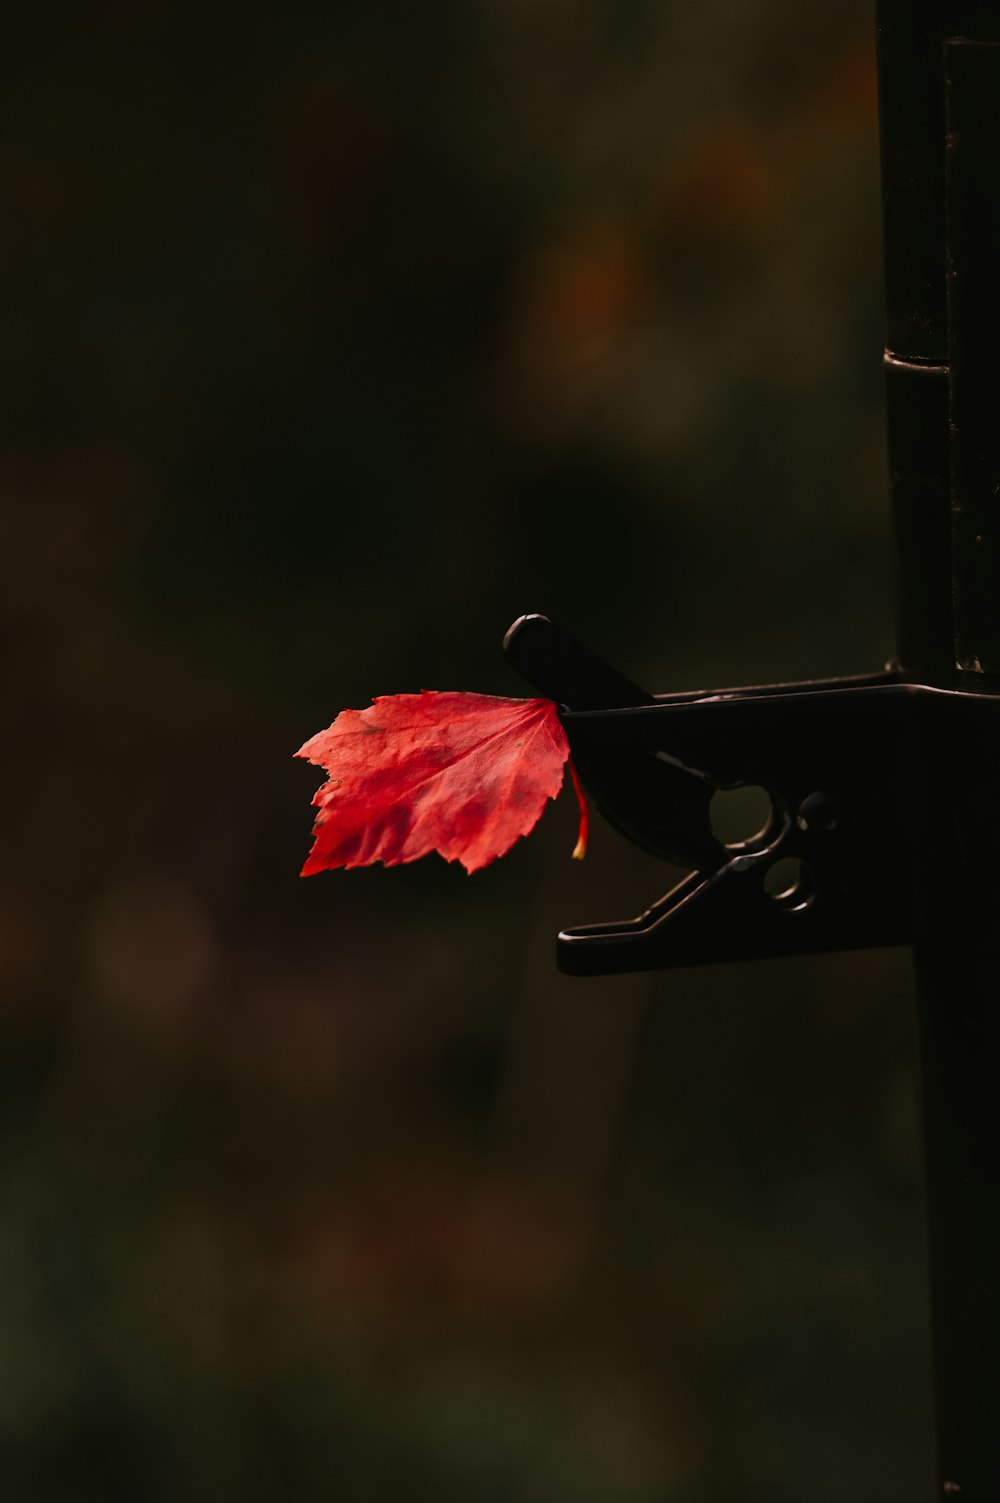 a red leaf is being held by a pair of scissors